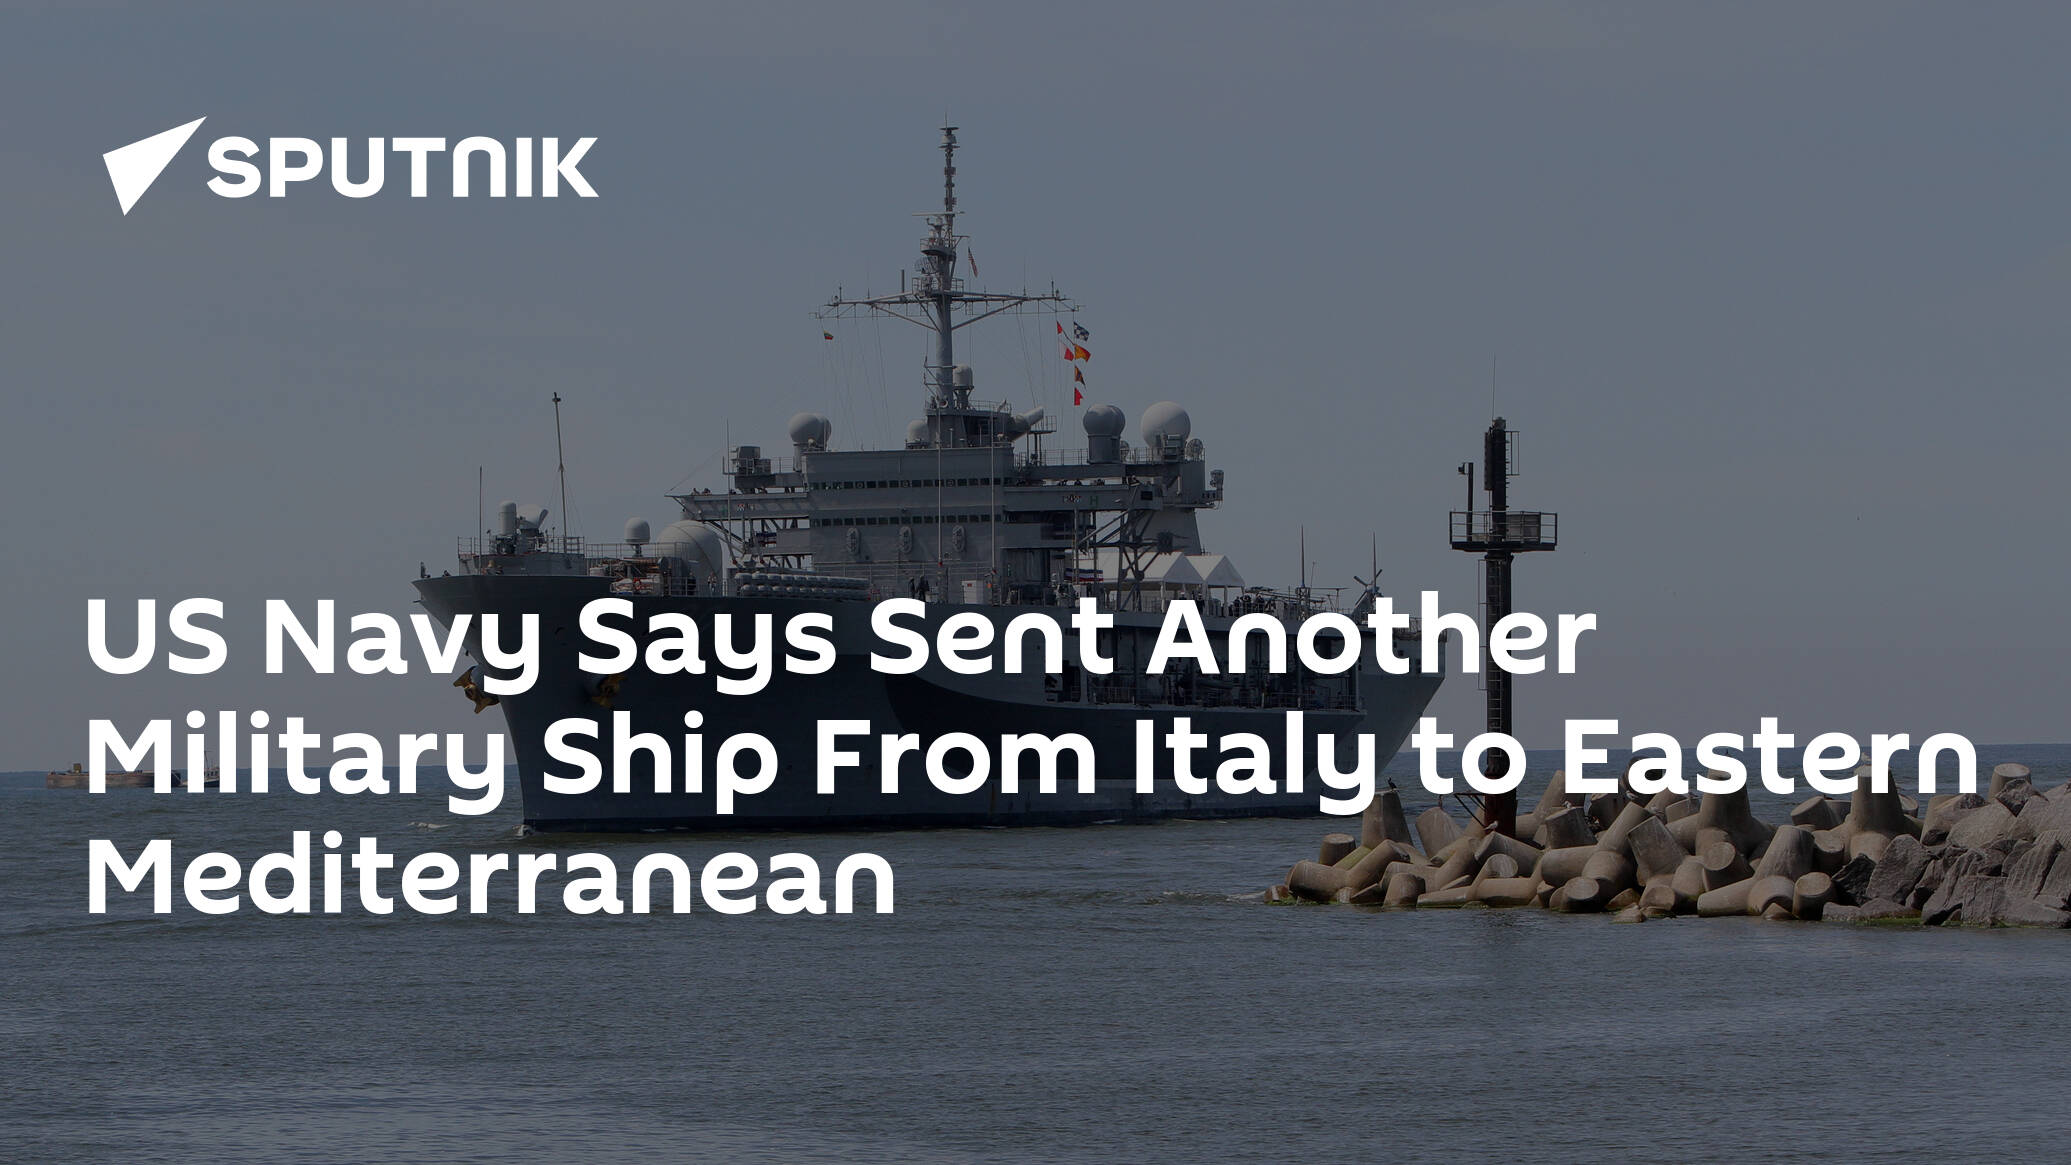 US Navy Says Sent Another Military Ship From Italy to Eastern Mediterranean